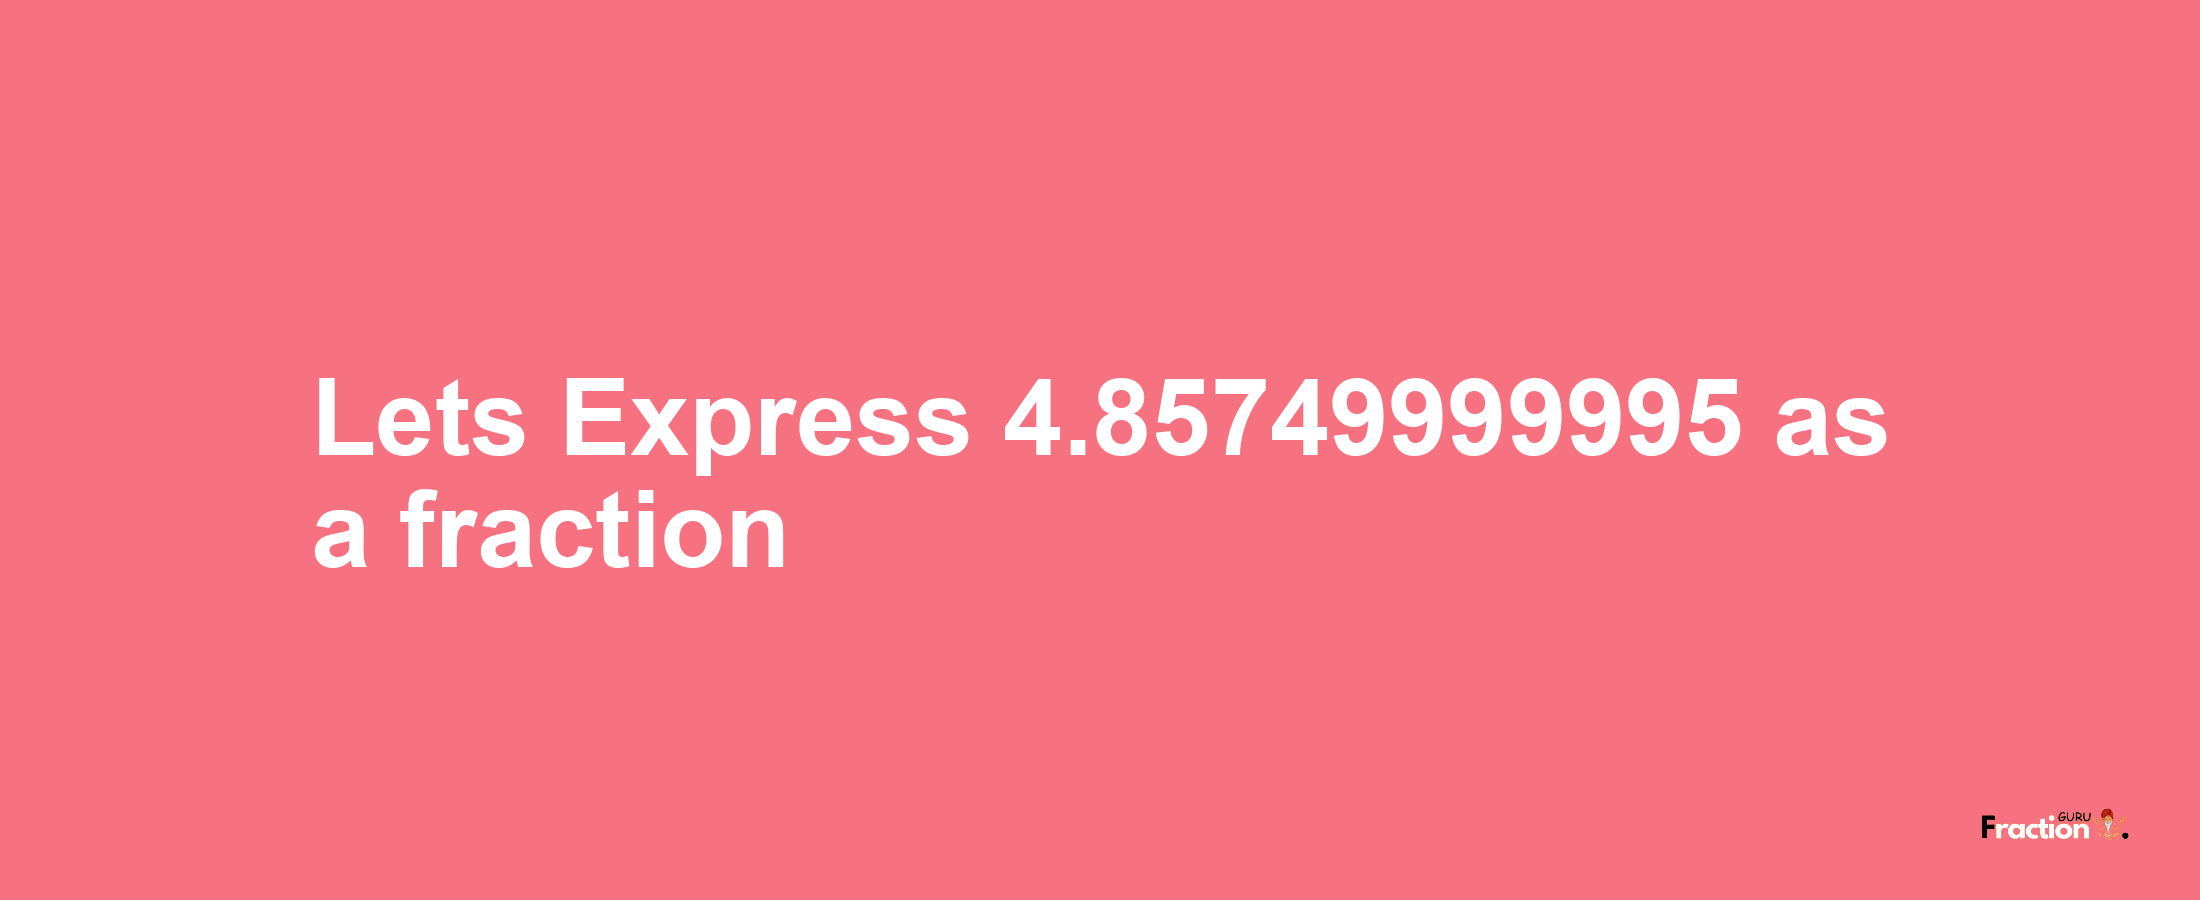 Lets Express 4.85749999995 as afraction